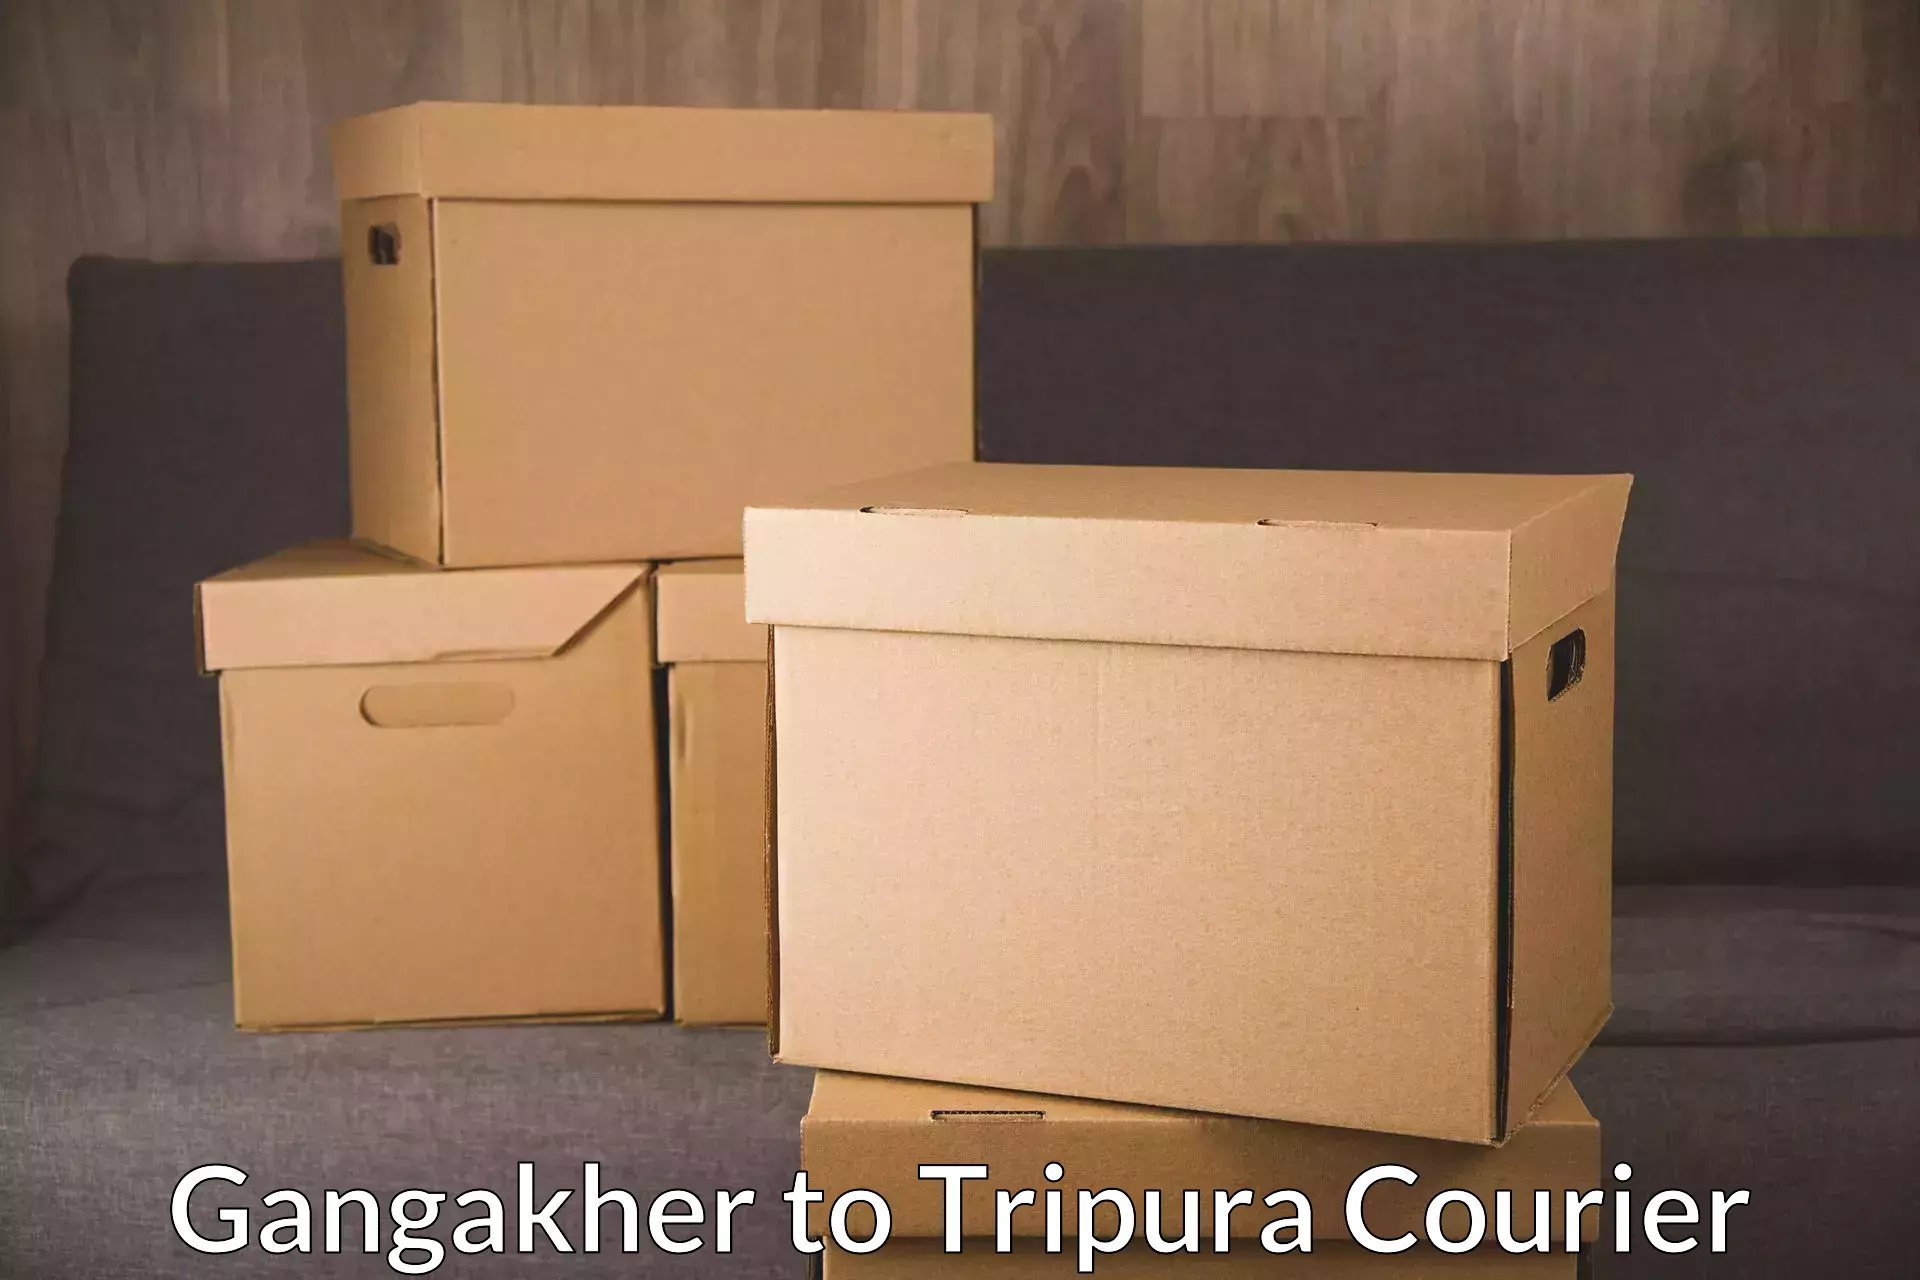 Package delivery network Gangakher to Tripura